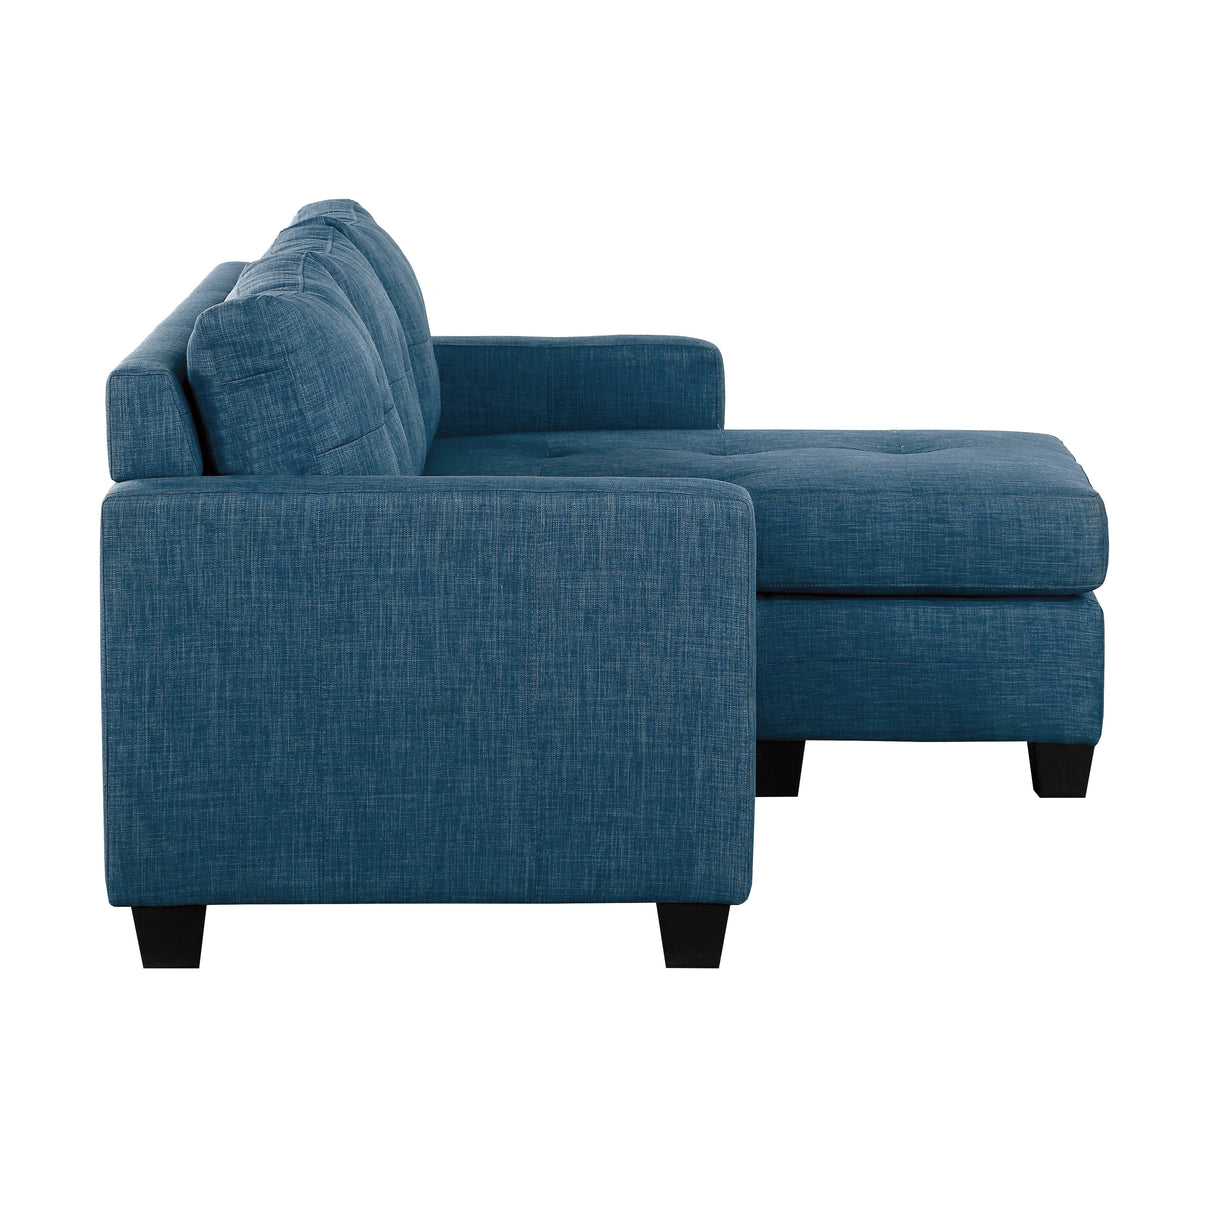 Phelps Blue Reversible Sofa Chaise